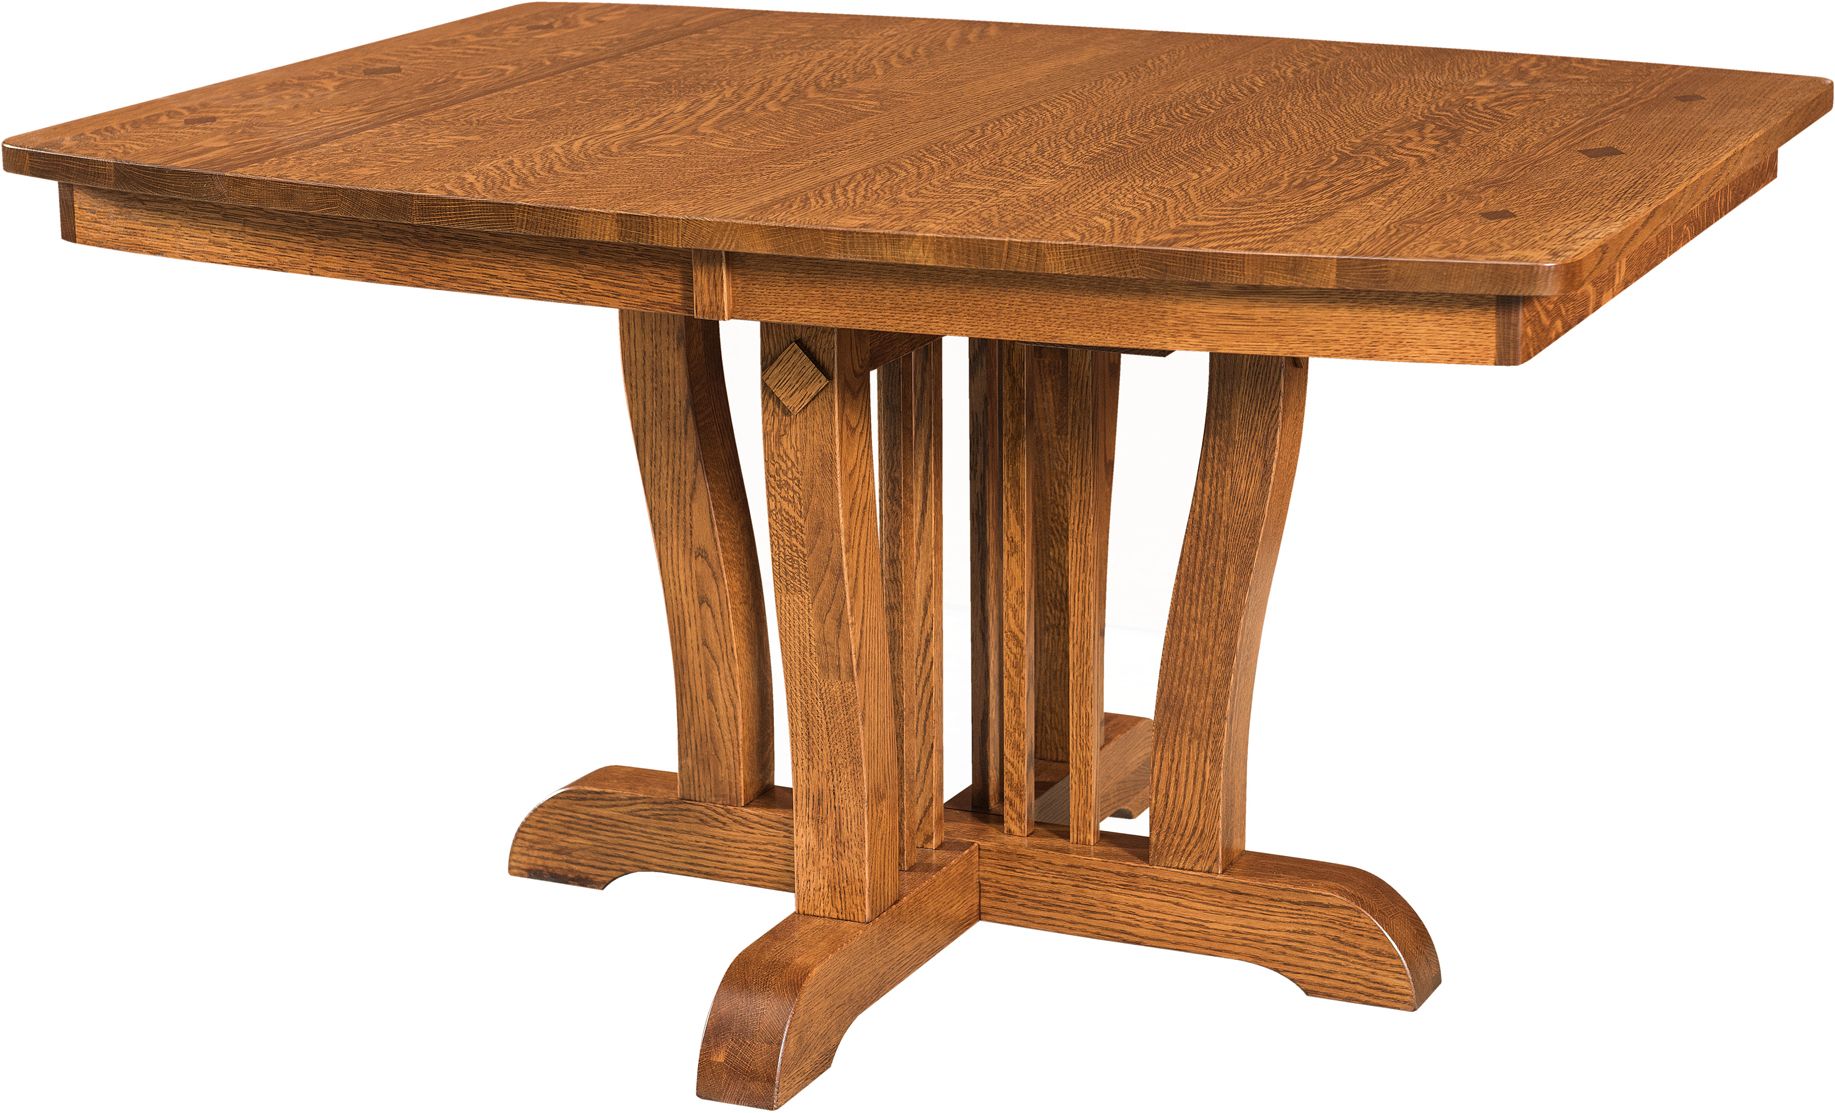 Amish Pedestal With Regard To Most Current Jazmin Pedestal Dining Tables (Gallery 10 of 20)